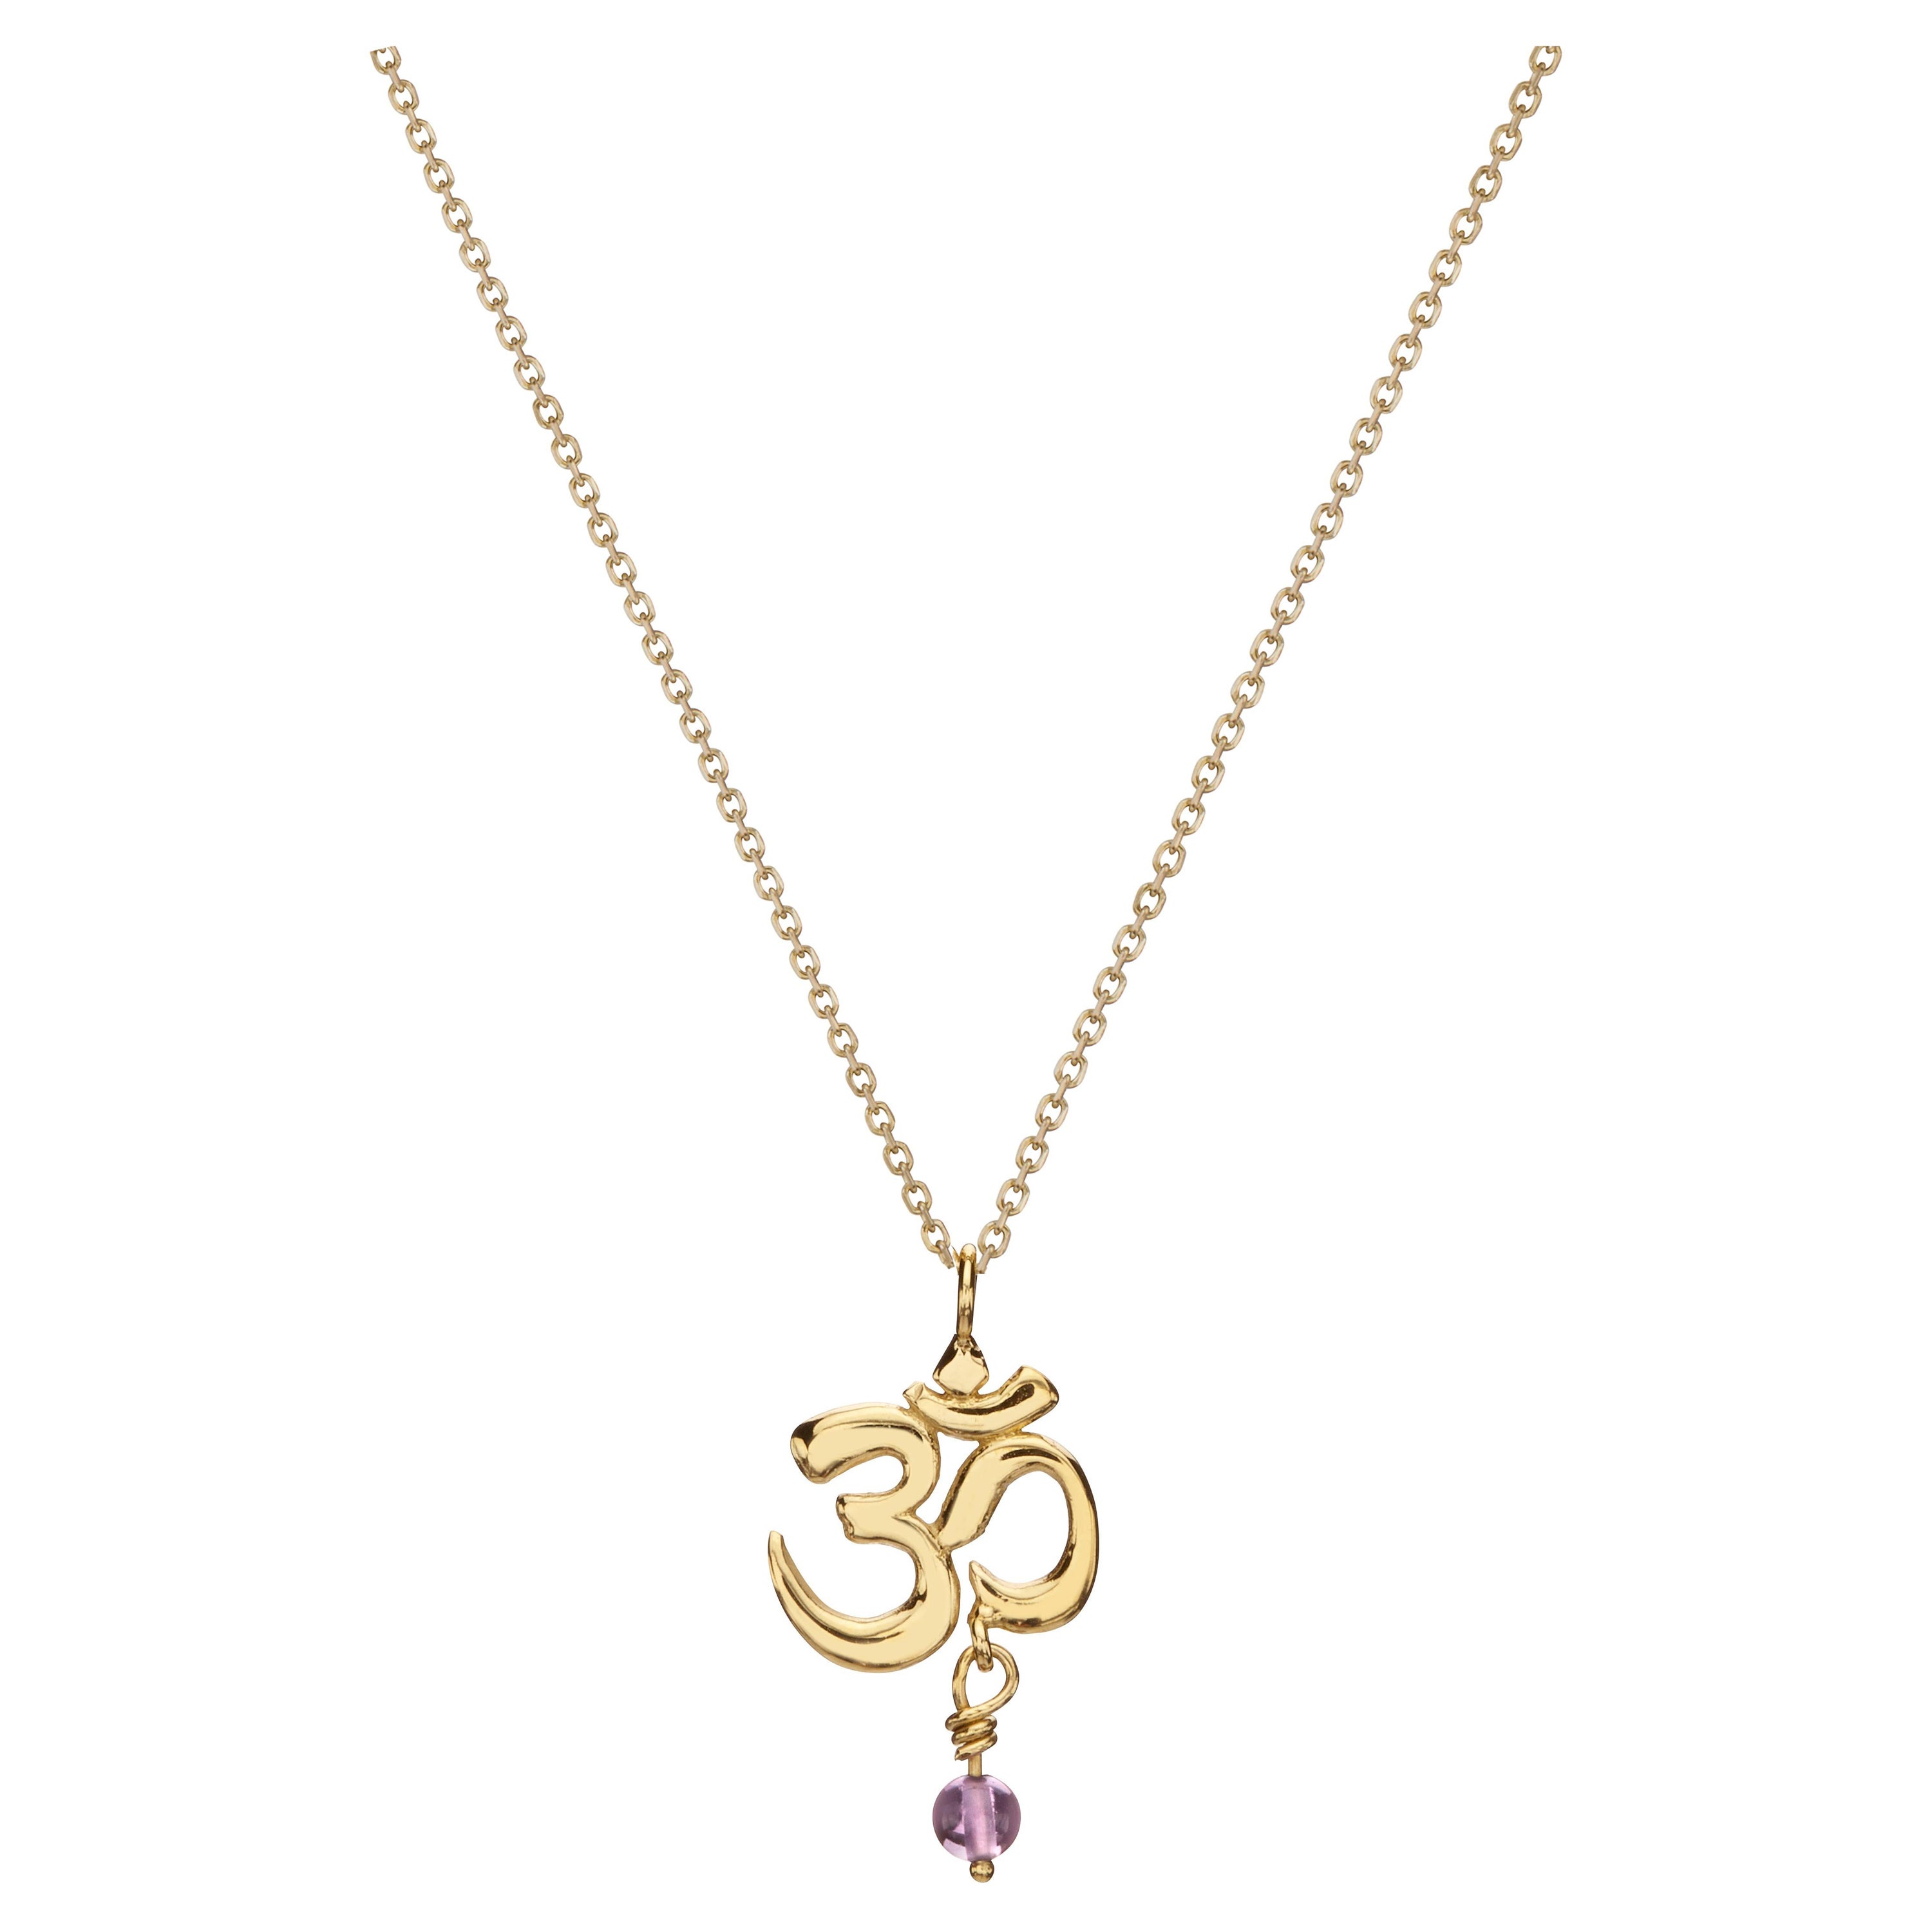 Handcrafted Pendant Necklace with the Om Symbol and Amethyst in 14Kt Gold